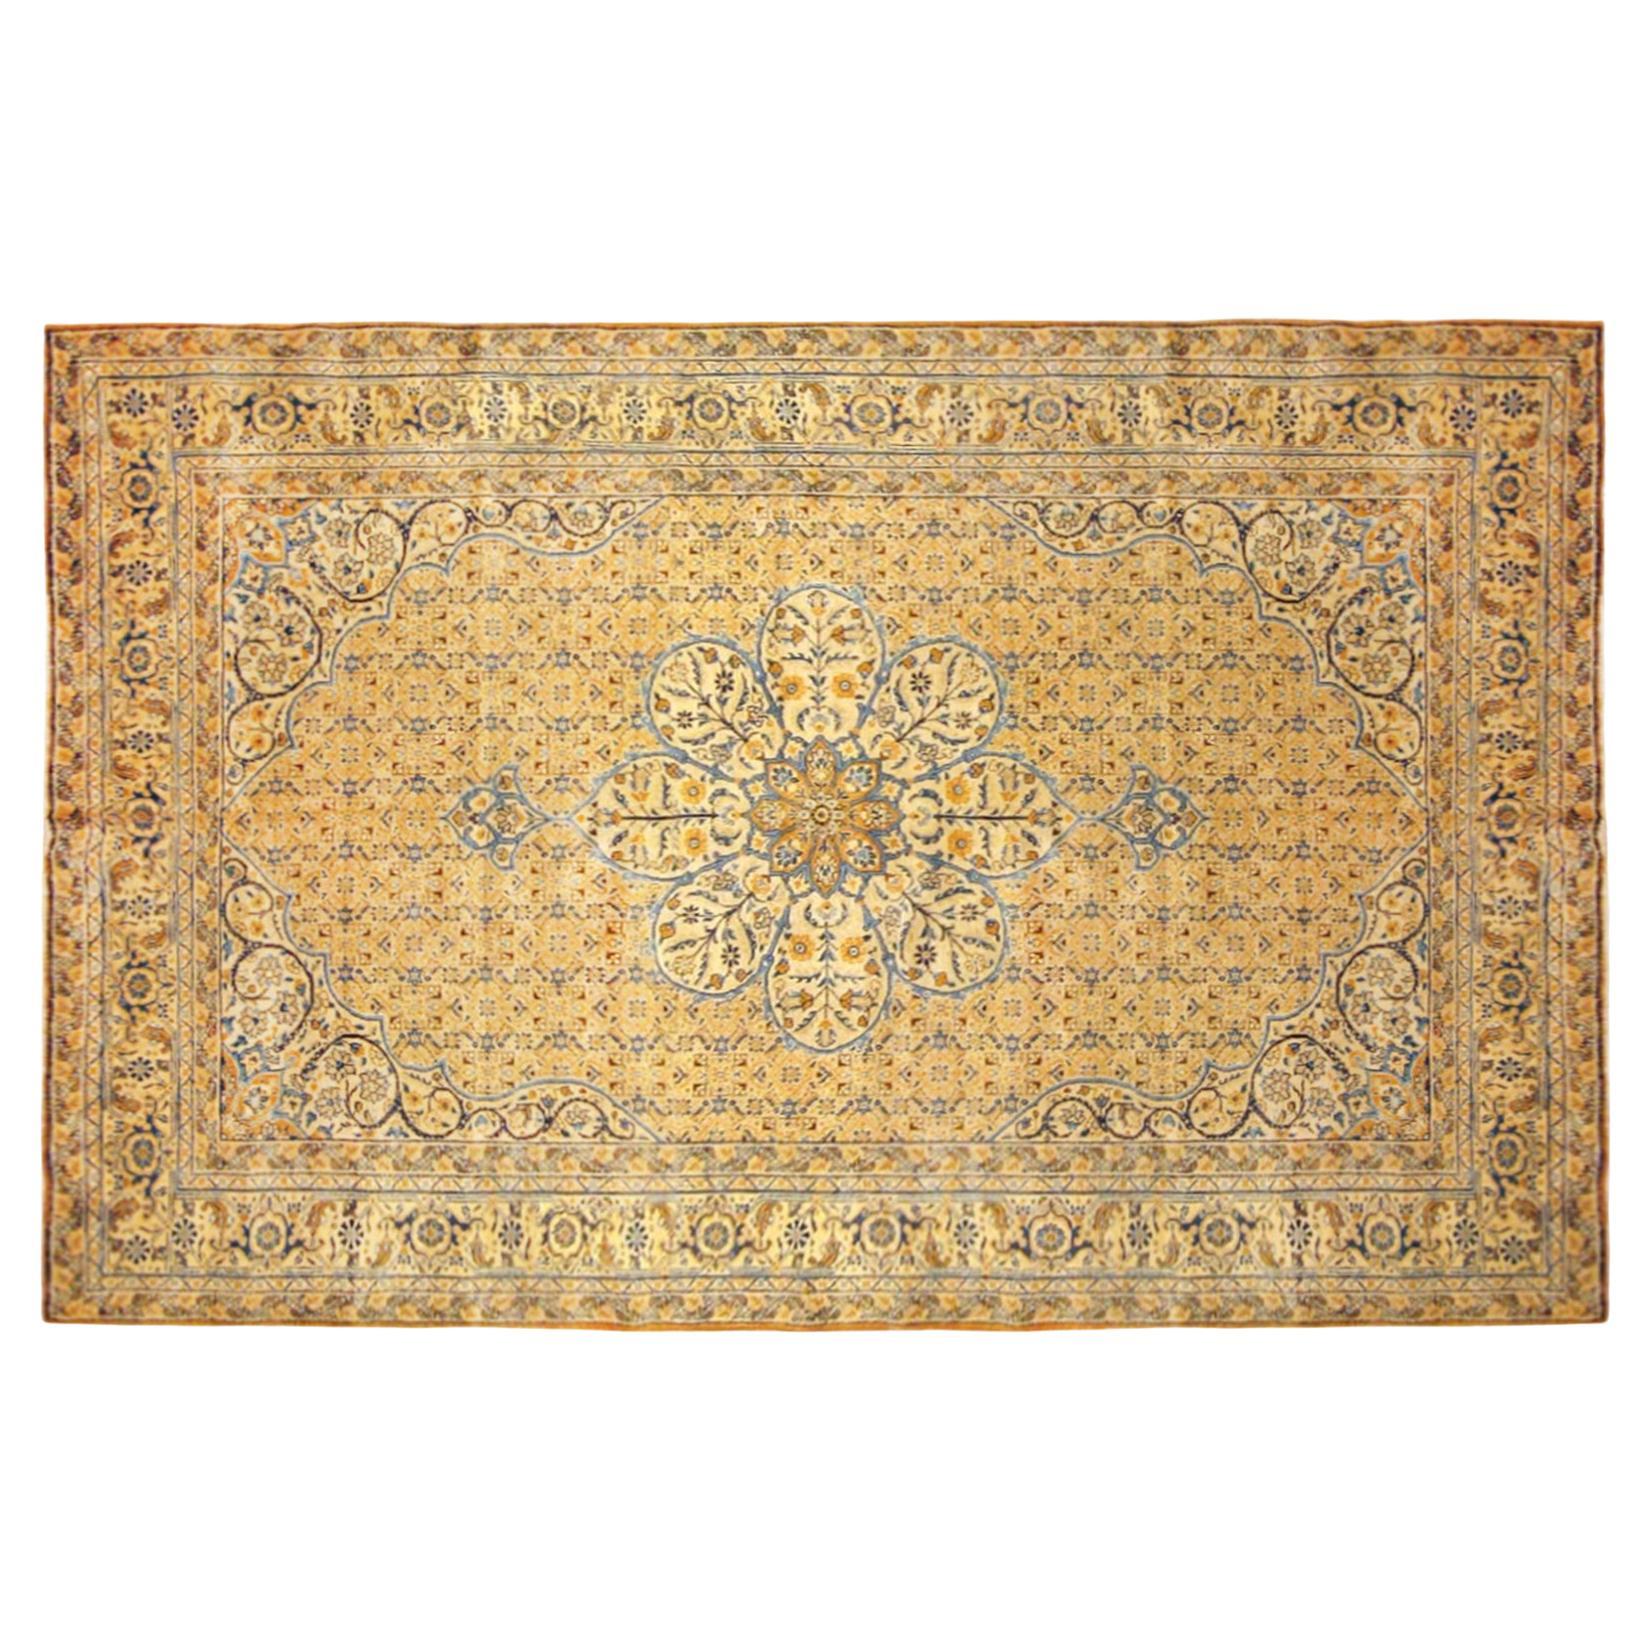 Antique Persian Tabriz Oriental Carpet in Room Size with Medallion For Sale